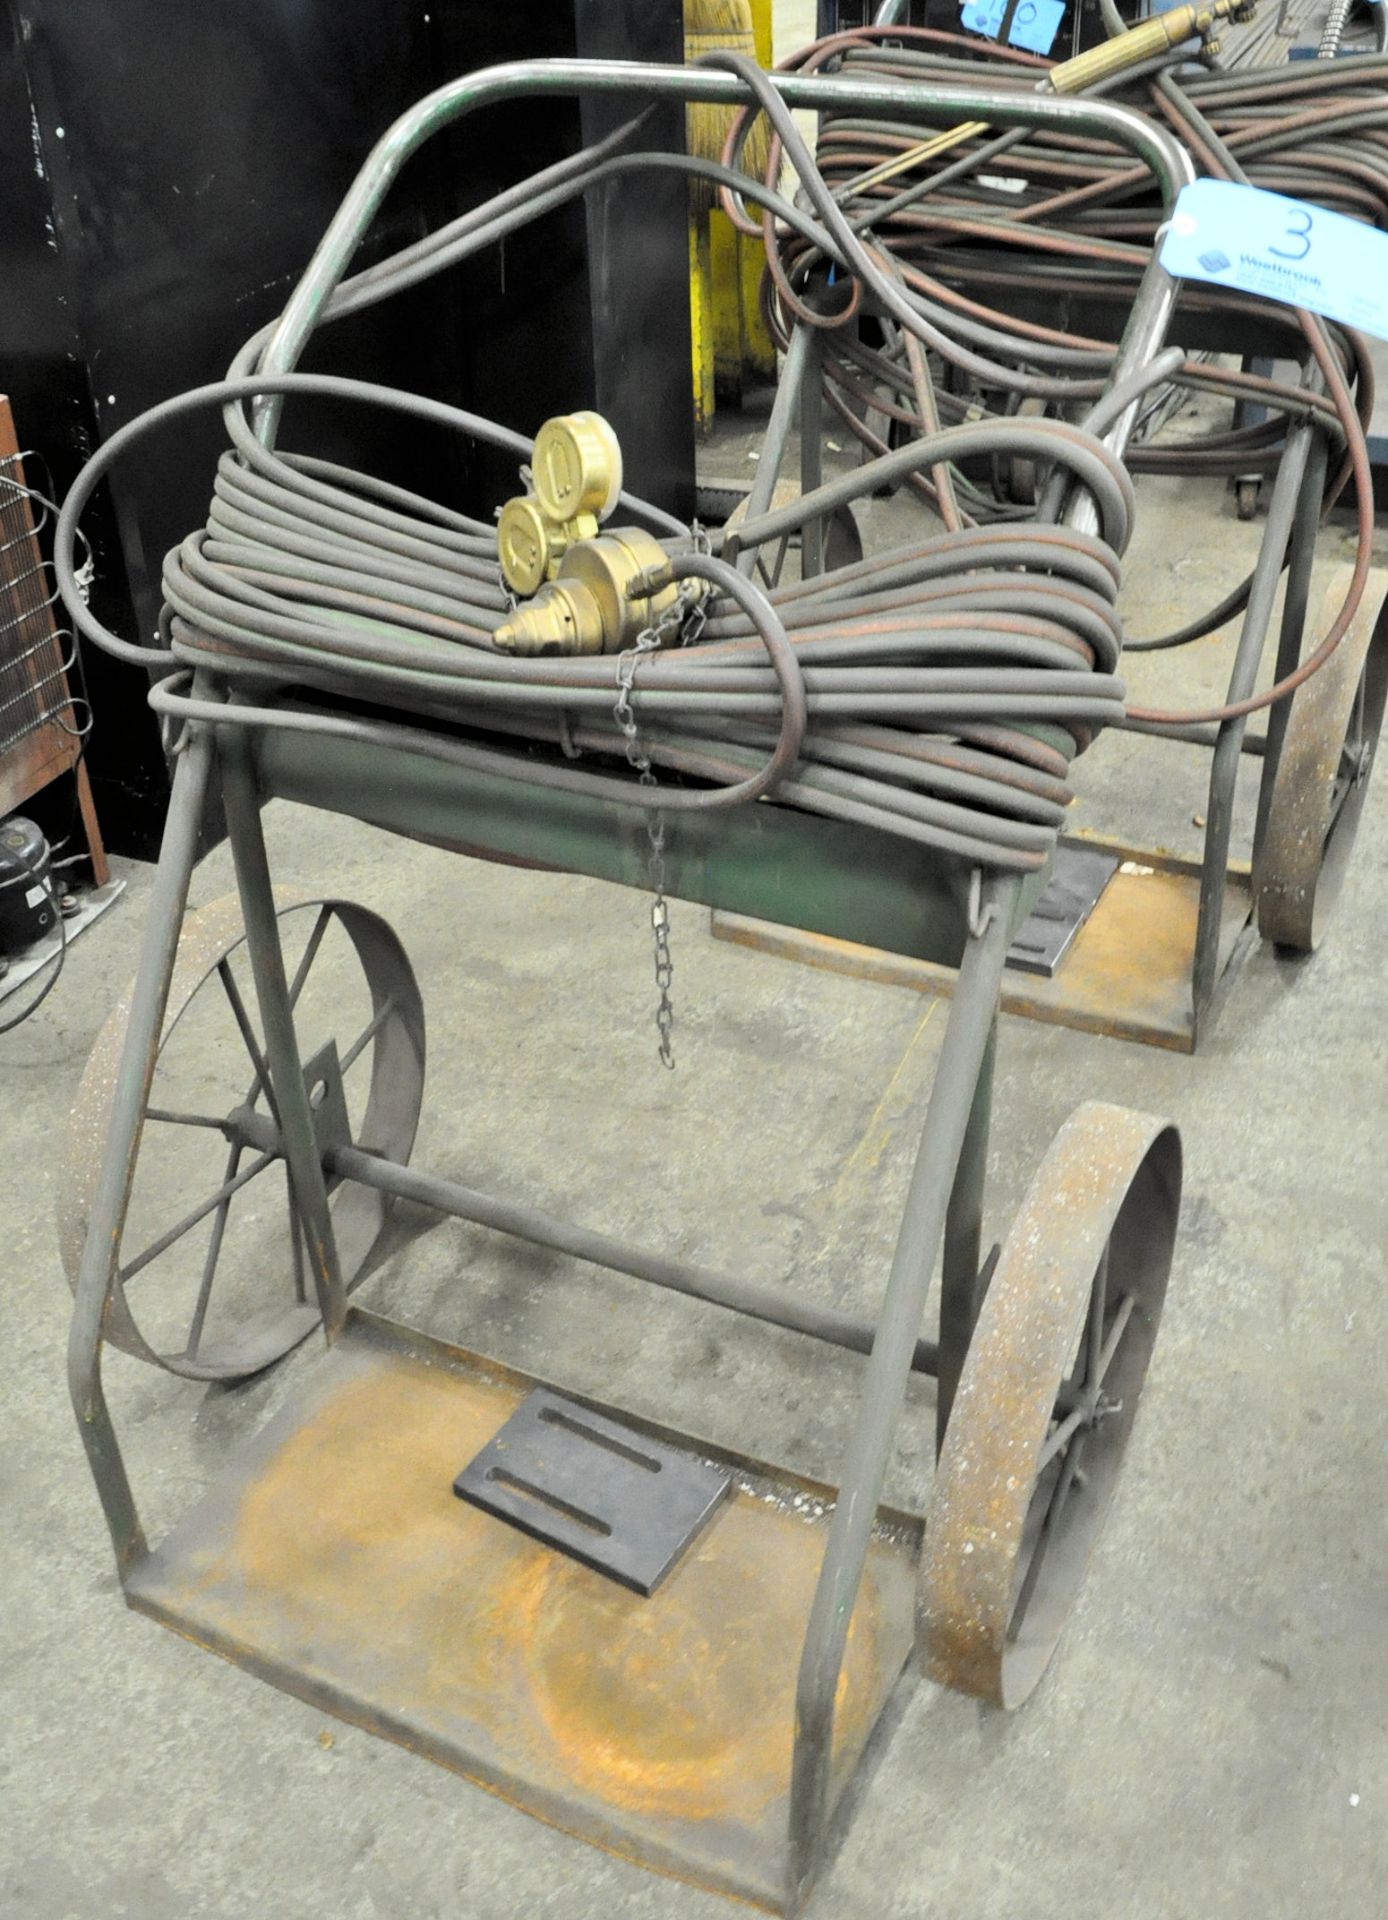 Oxygen/Acetylene Outfit with Cart, Hose, Torch and Regulators, (Tanks Not Included)